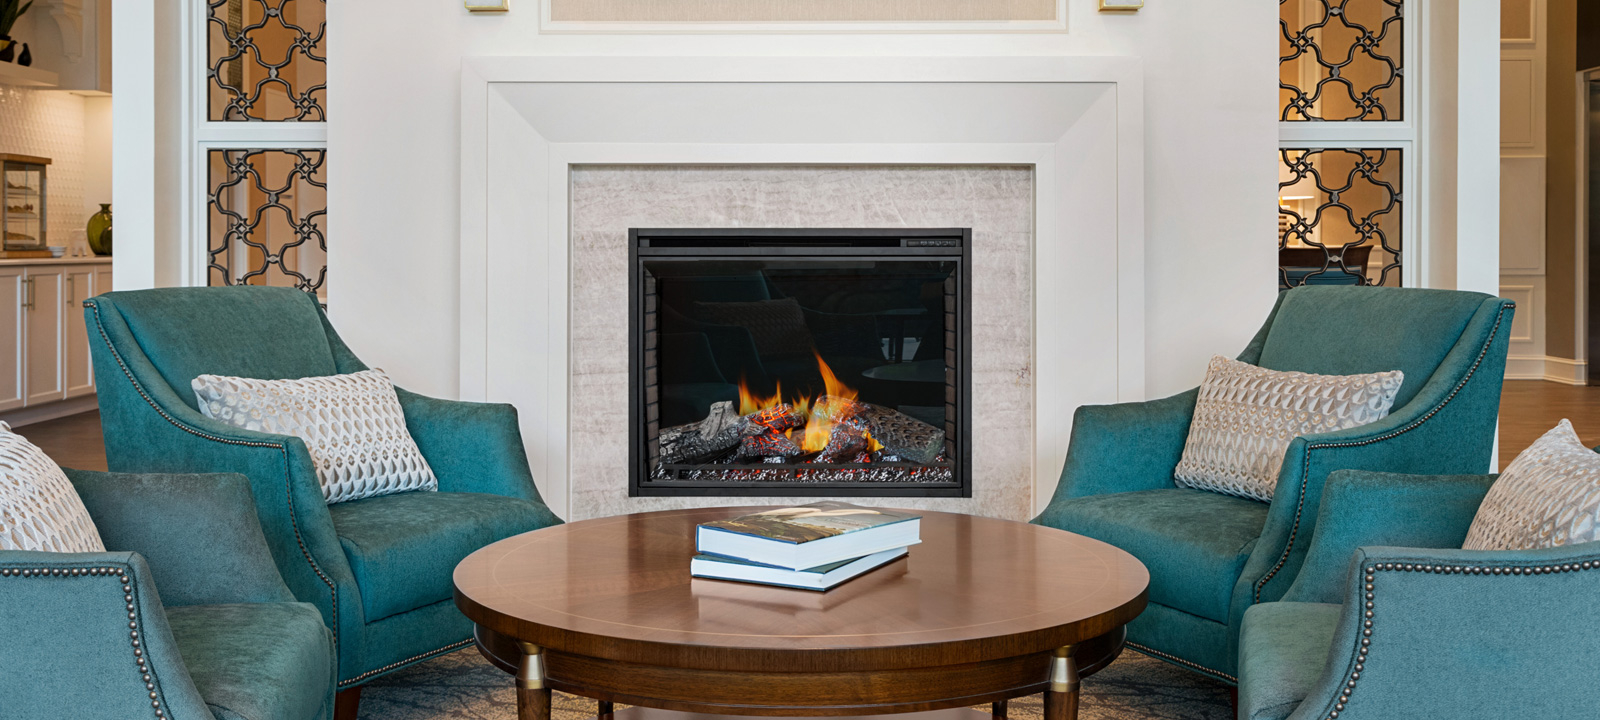 Image of Amica Glebe lounge with green chairs and fireplace (overlay over image so text can be overlaid on it).